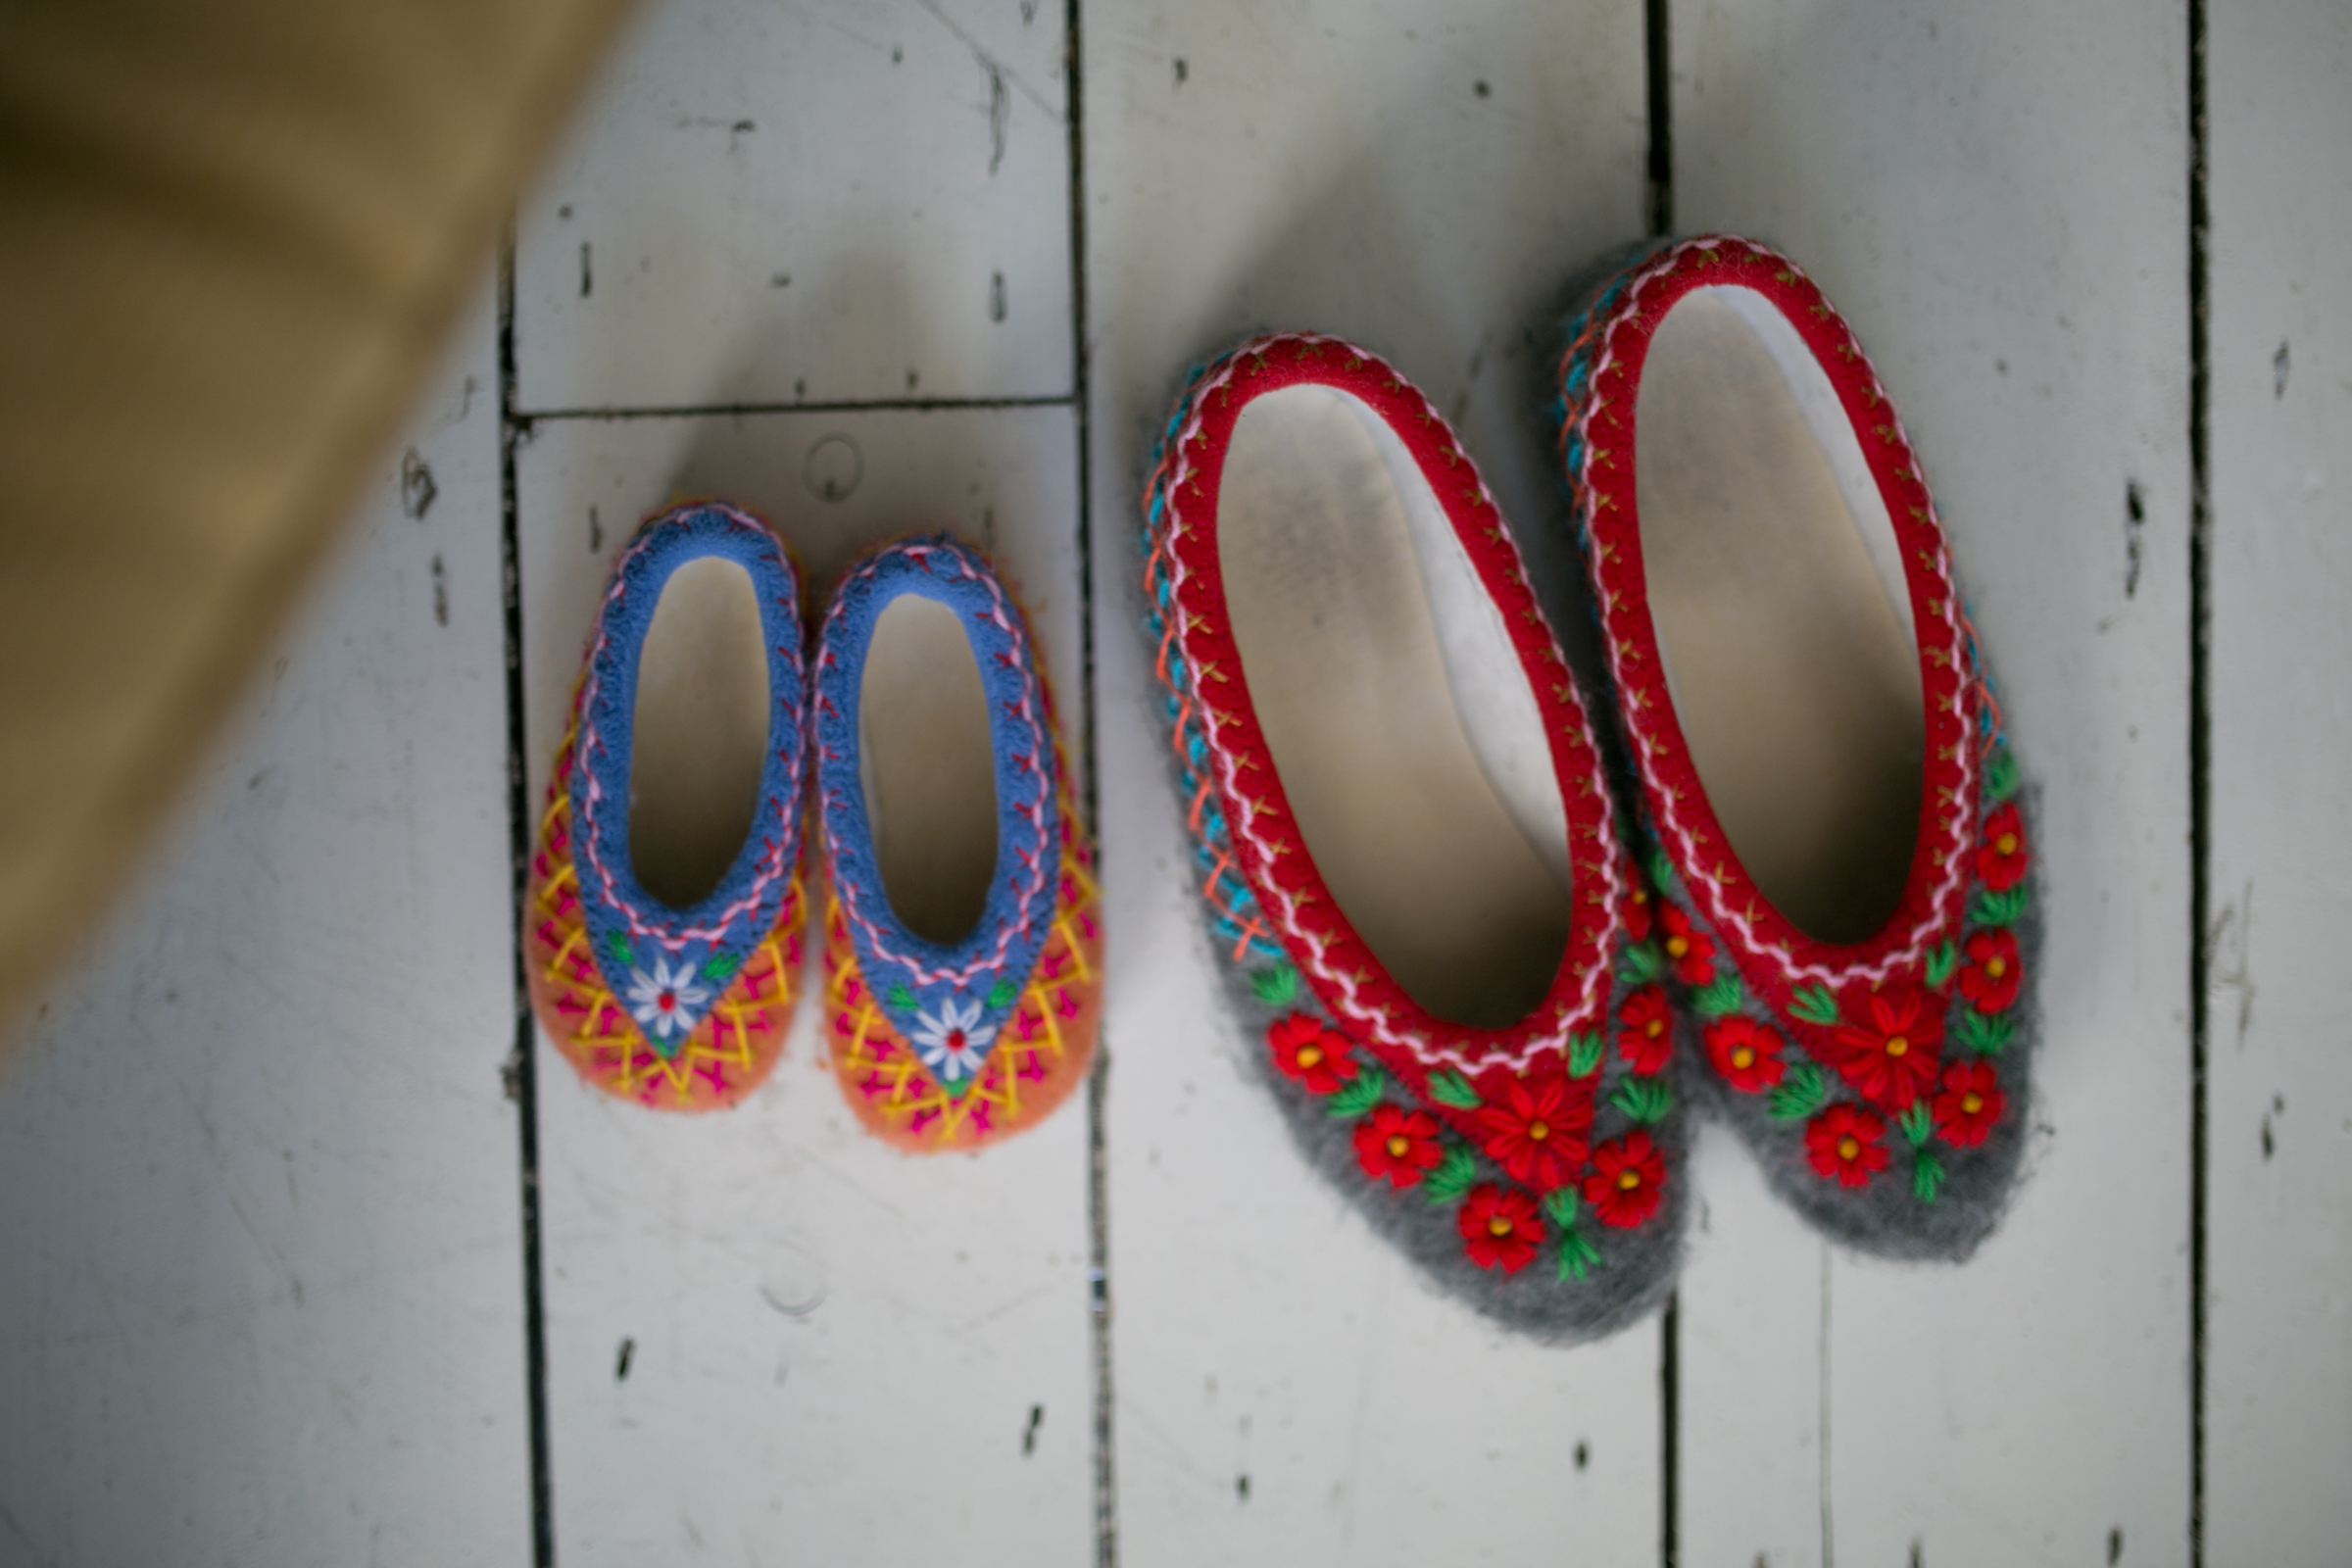 Vintage handmade wool folk slippers/socks/shoes with embroidery - Ruby Lane